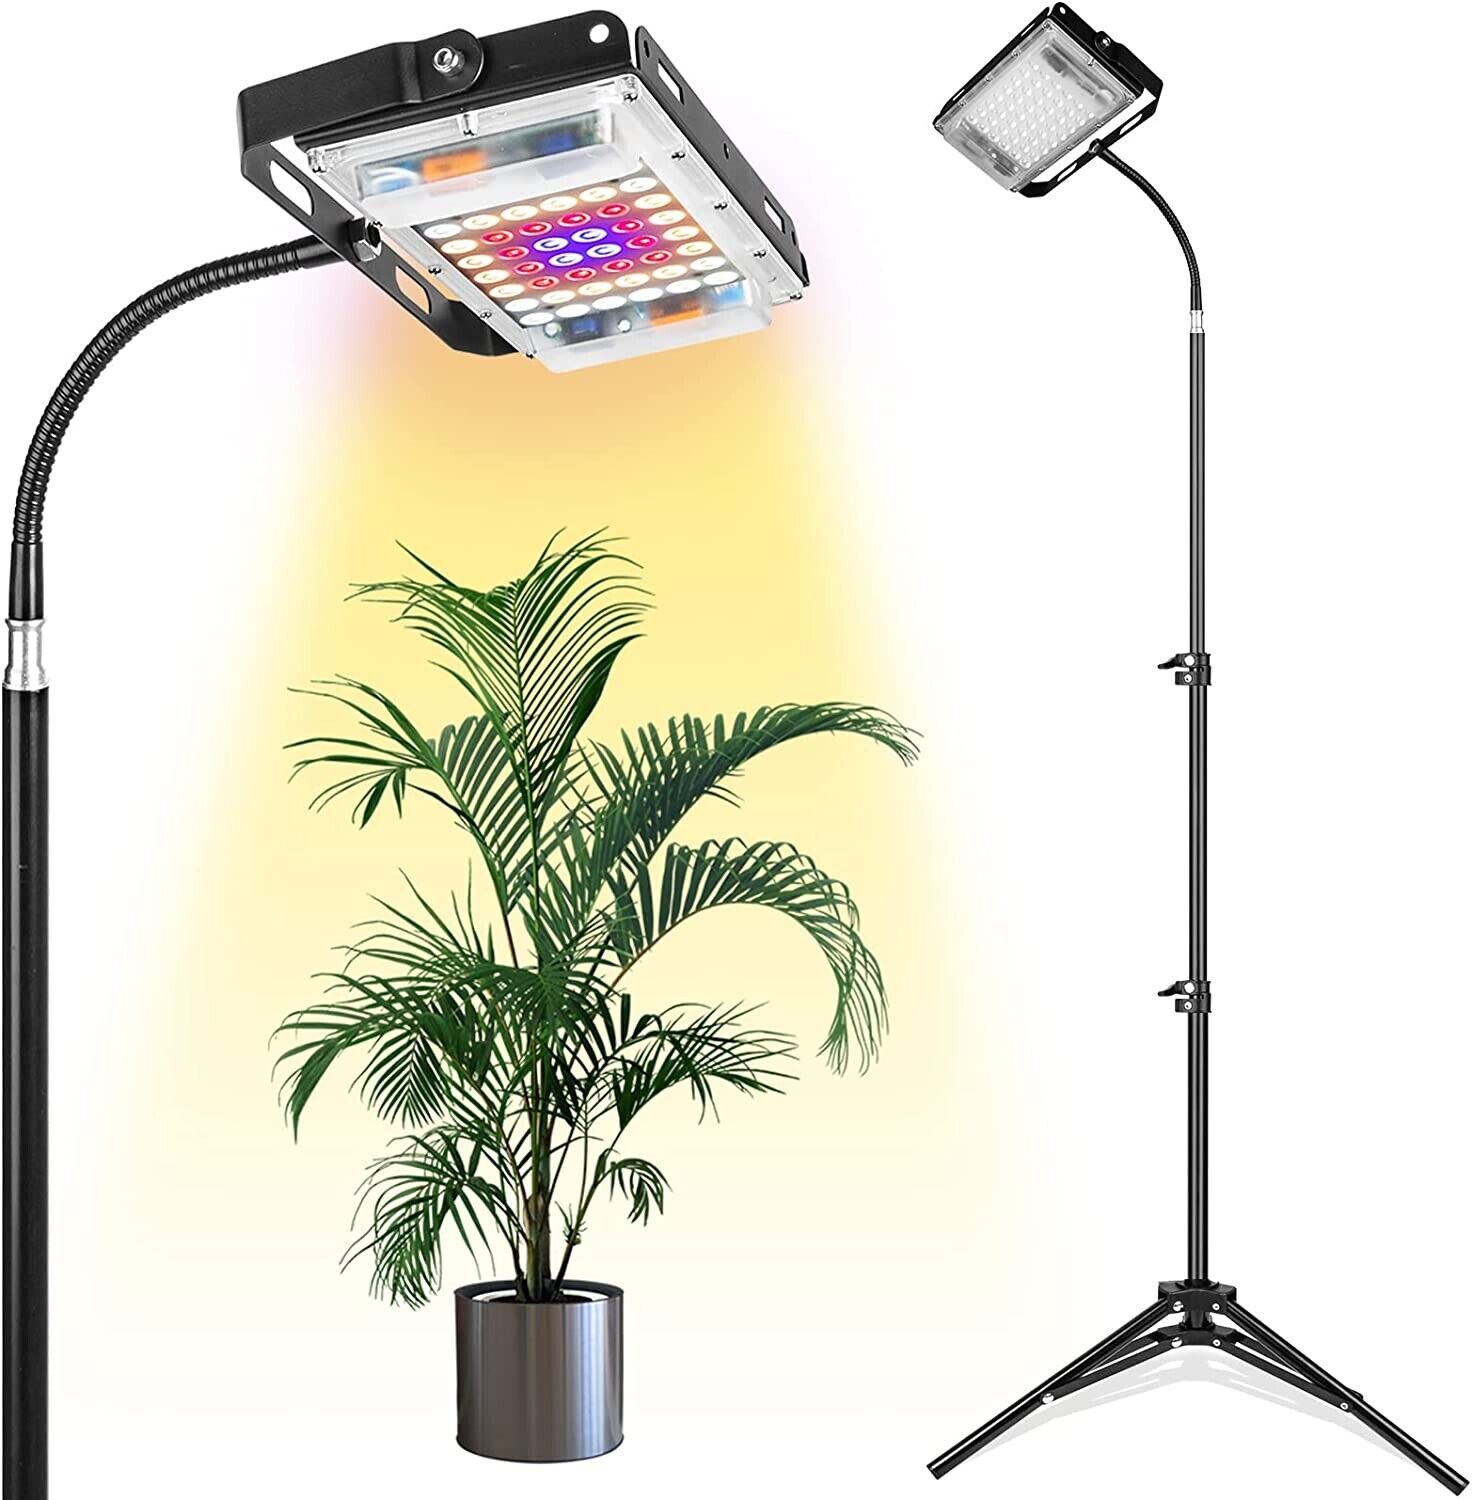 LED Grow Light with Stand 150W for Indoor Plants Full Spectrum Lamp 15-48 Inches